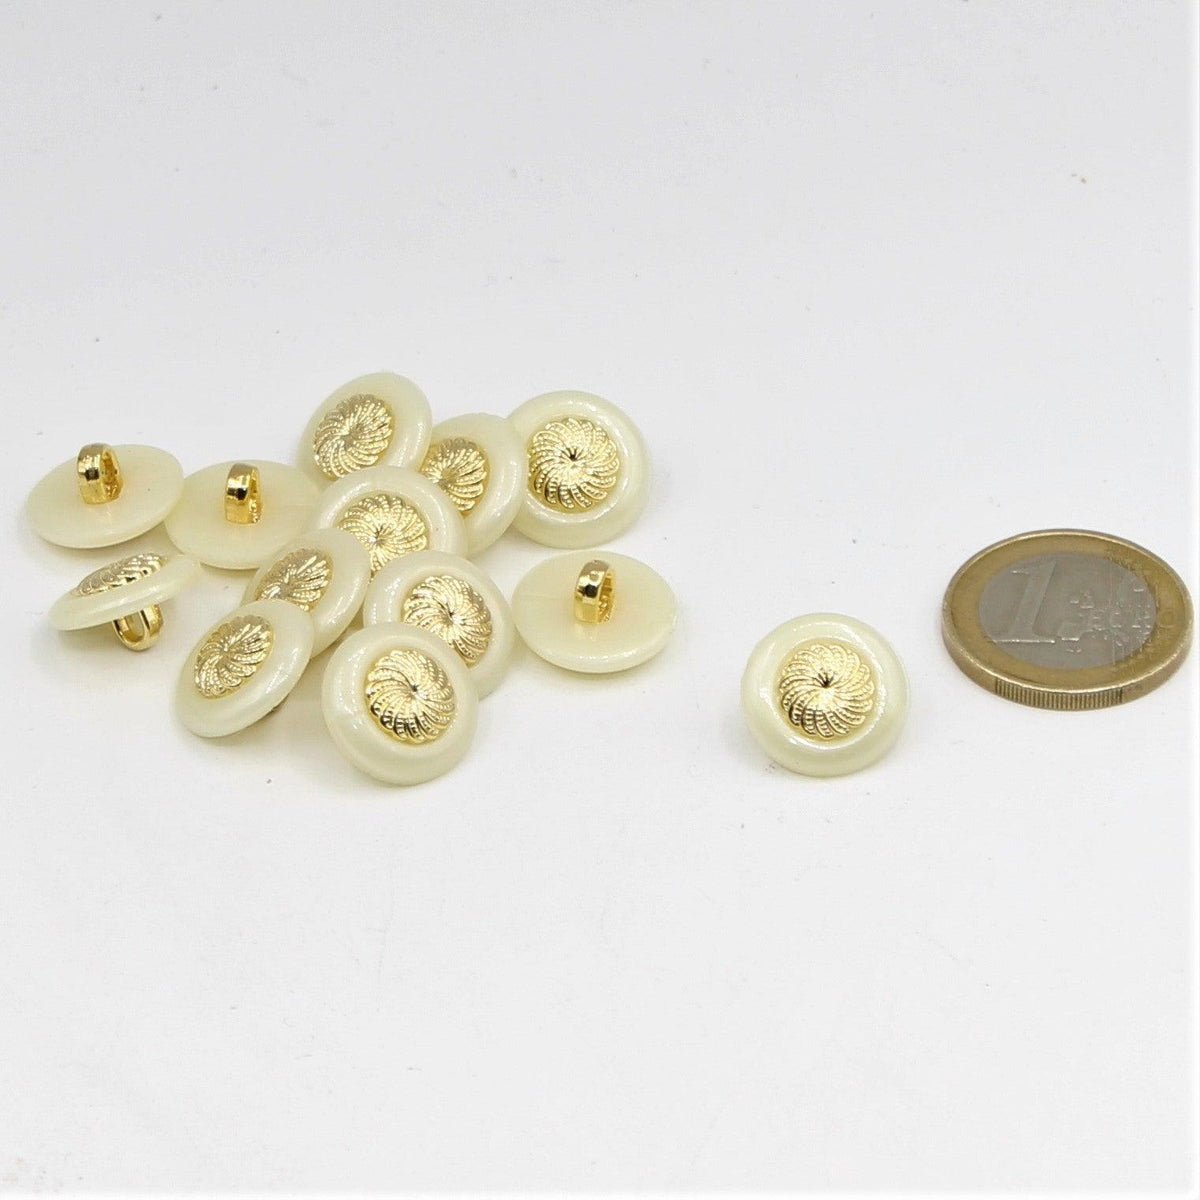 21mm Gold Shank Button Filled with Cream Enamel - Totally Buttons